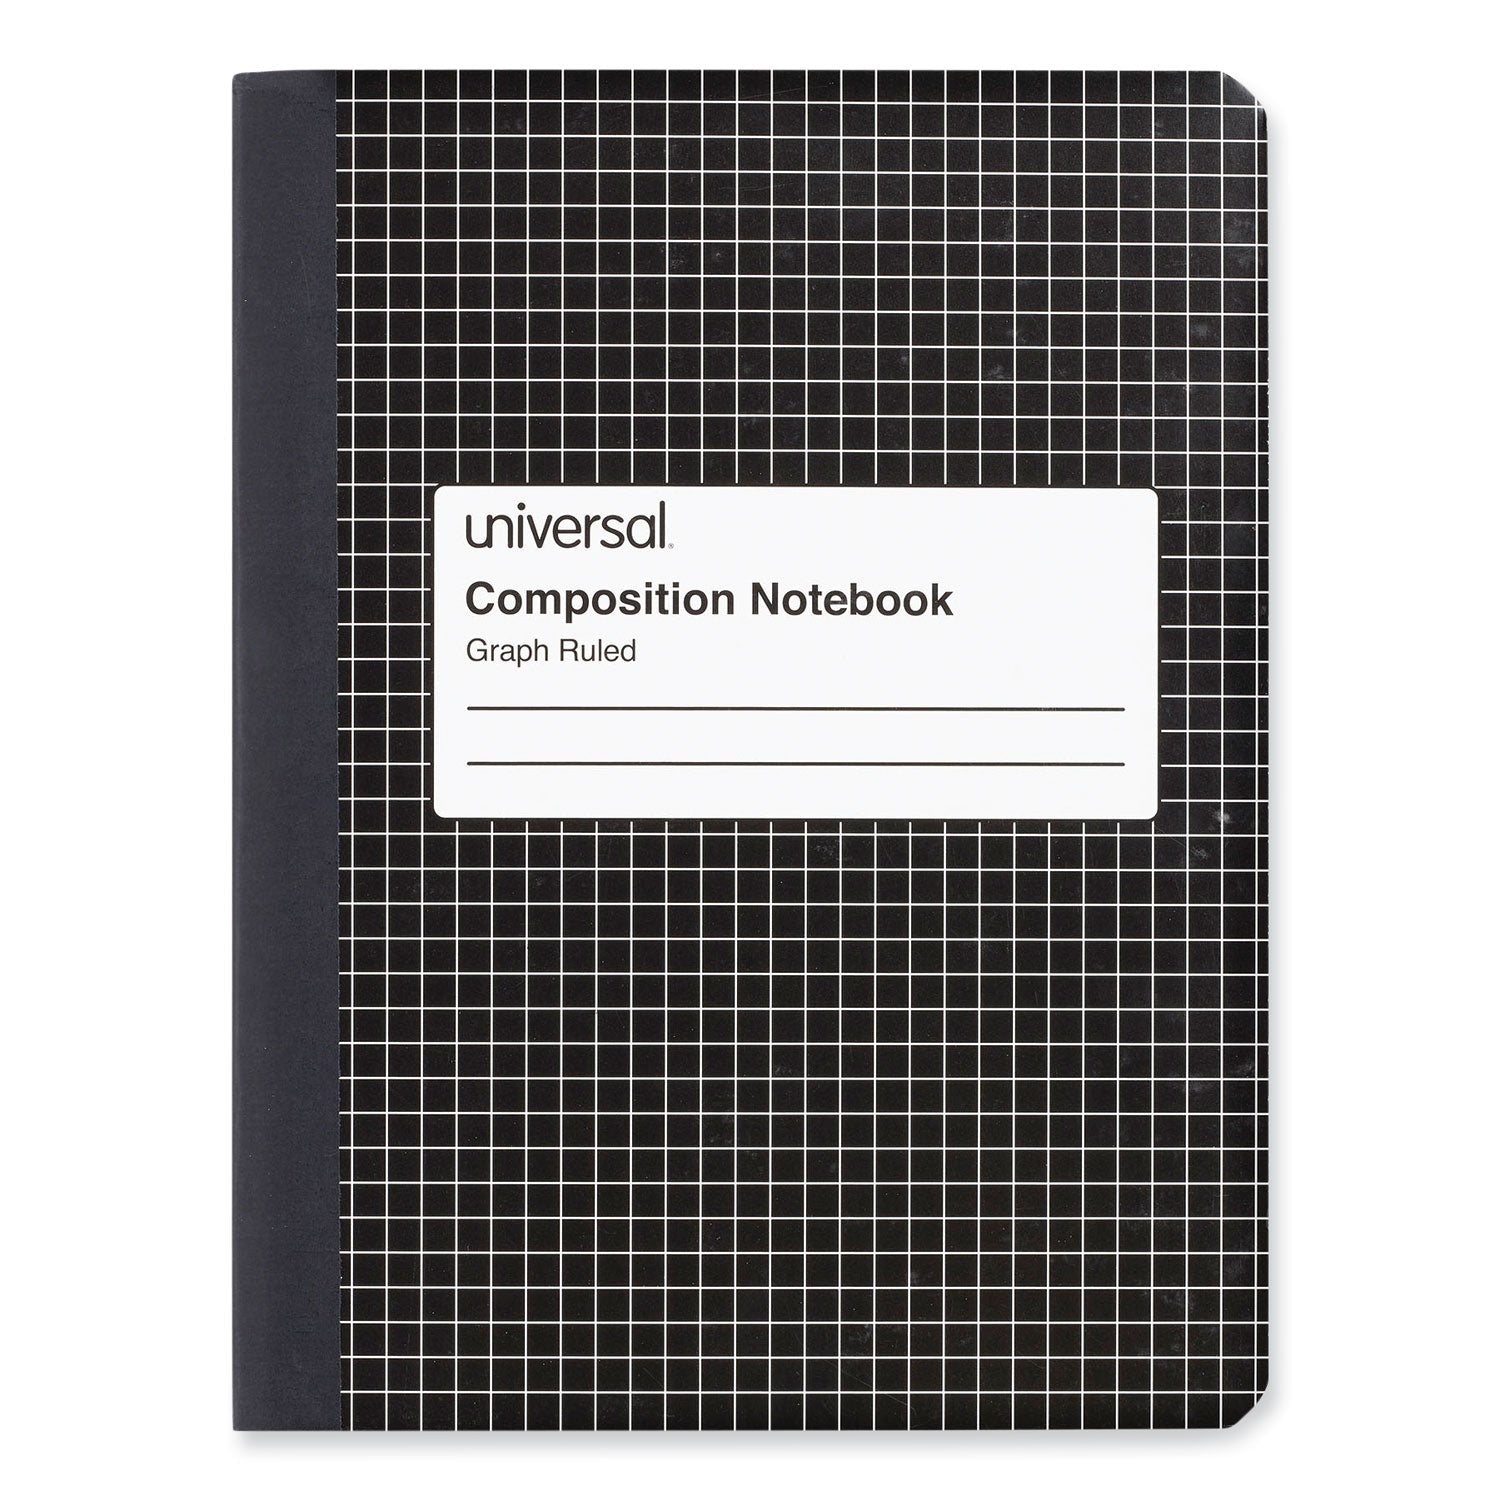 quad-rule-composition-book-quadrille-rule-4-sq-in-black-marble-cover-100-975-x-75-sheets_unv20950 - 1